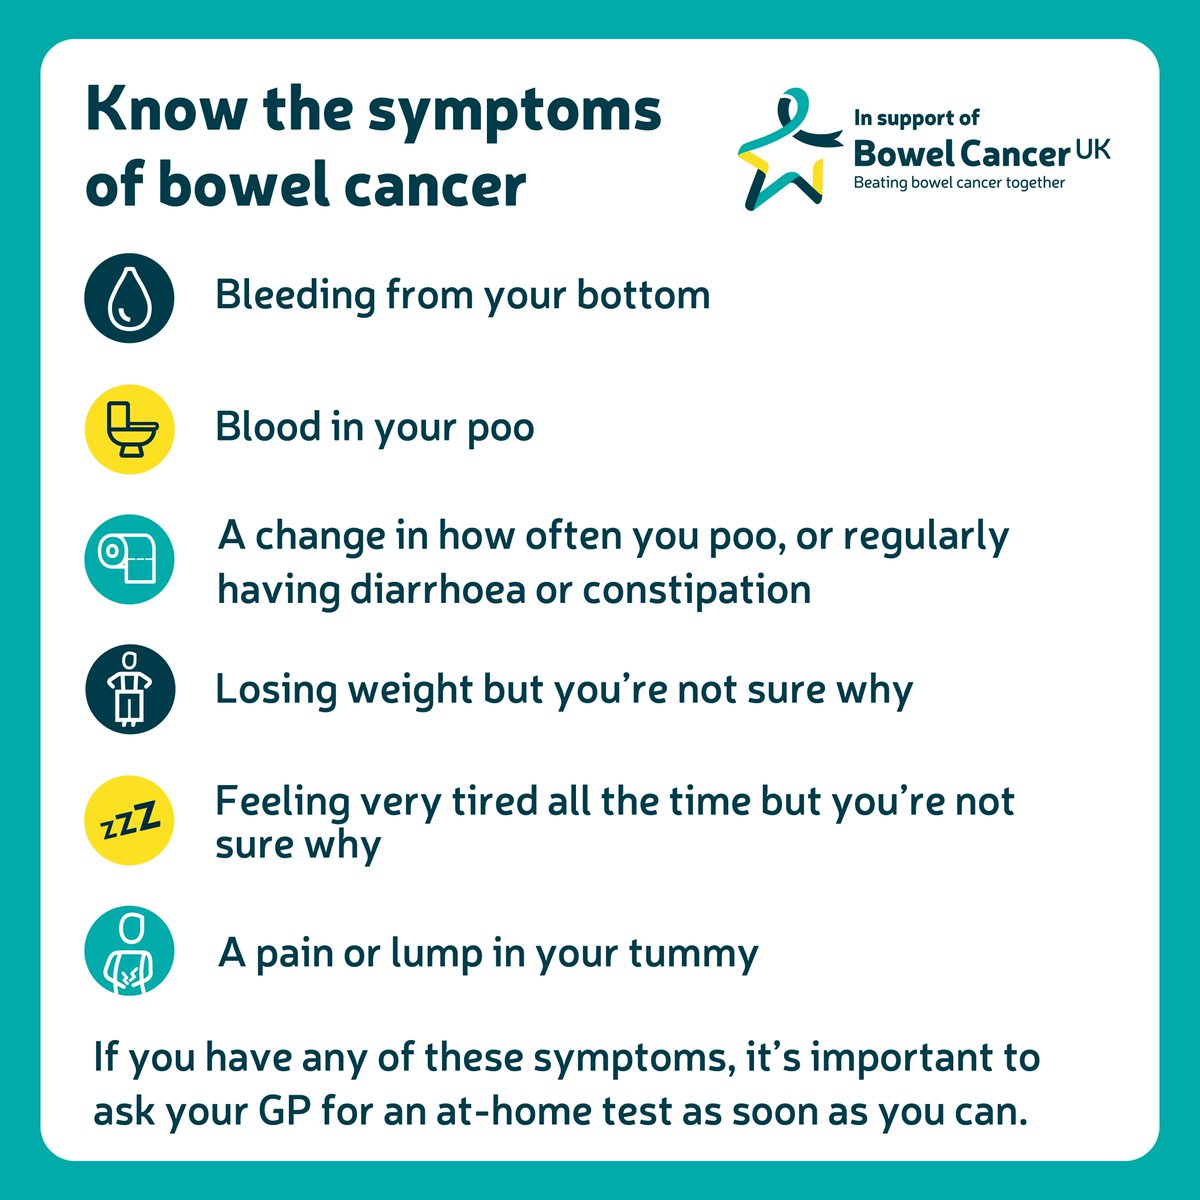 As Bowel Cancer Awareness Month comes to an end, have you noticed our own-brand toilet rolls display the key symptoms? It’s through our partnership with @bowelcanceruk and their #GetOnARoll campaign - helping to raise awareness and hopefully save lives: bit.ly/3UlFr2m